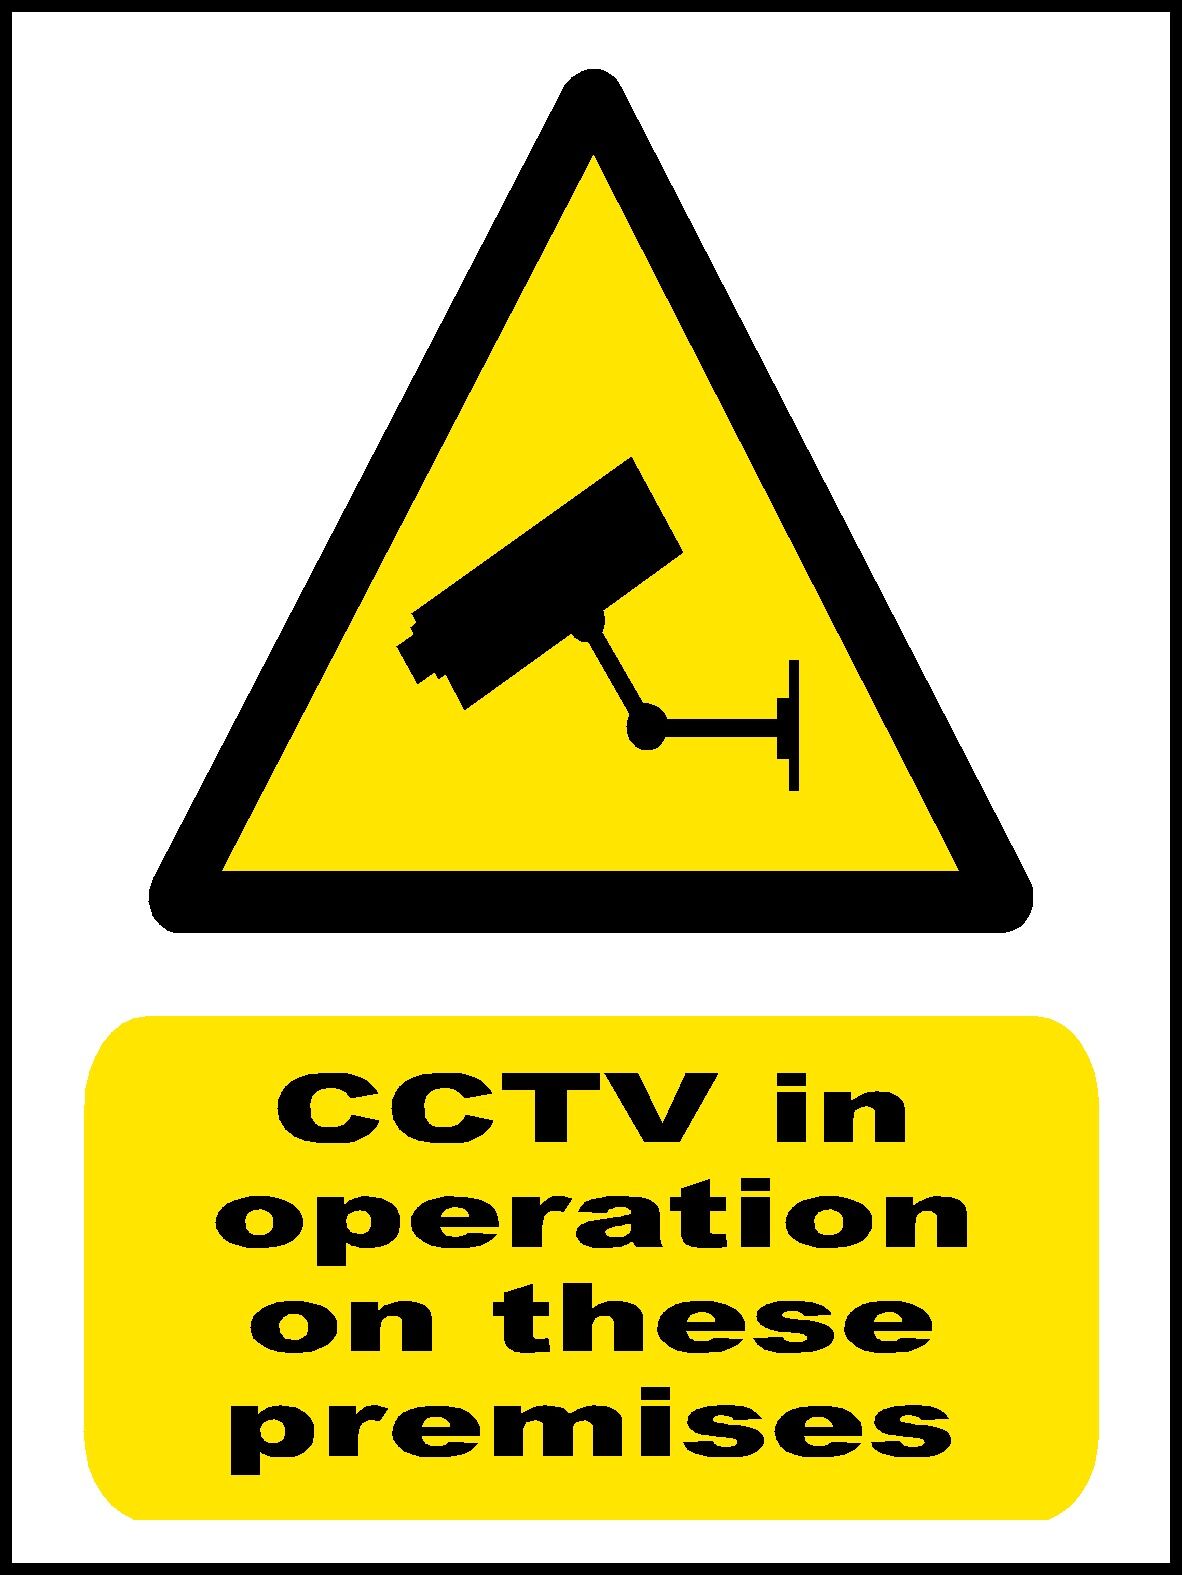 CCTV In Operation on these premises Safety Sign